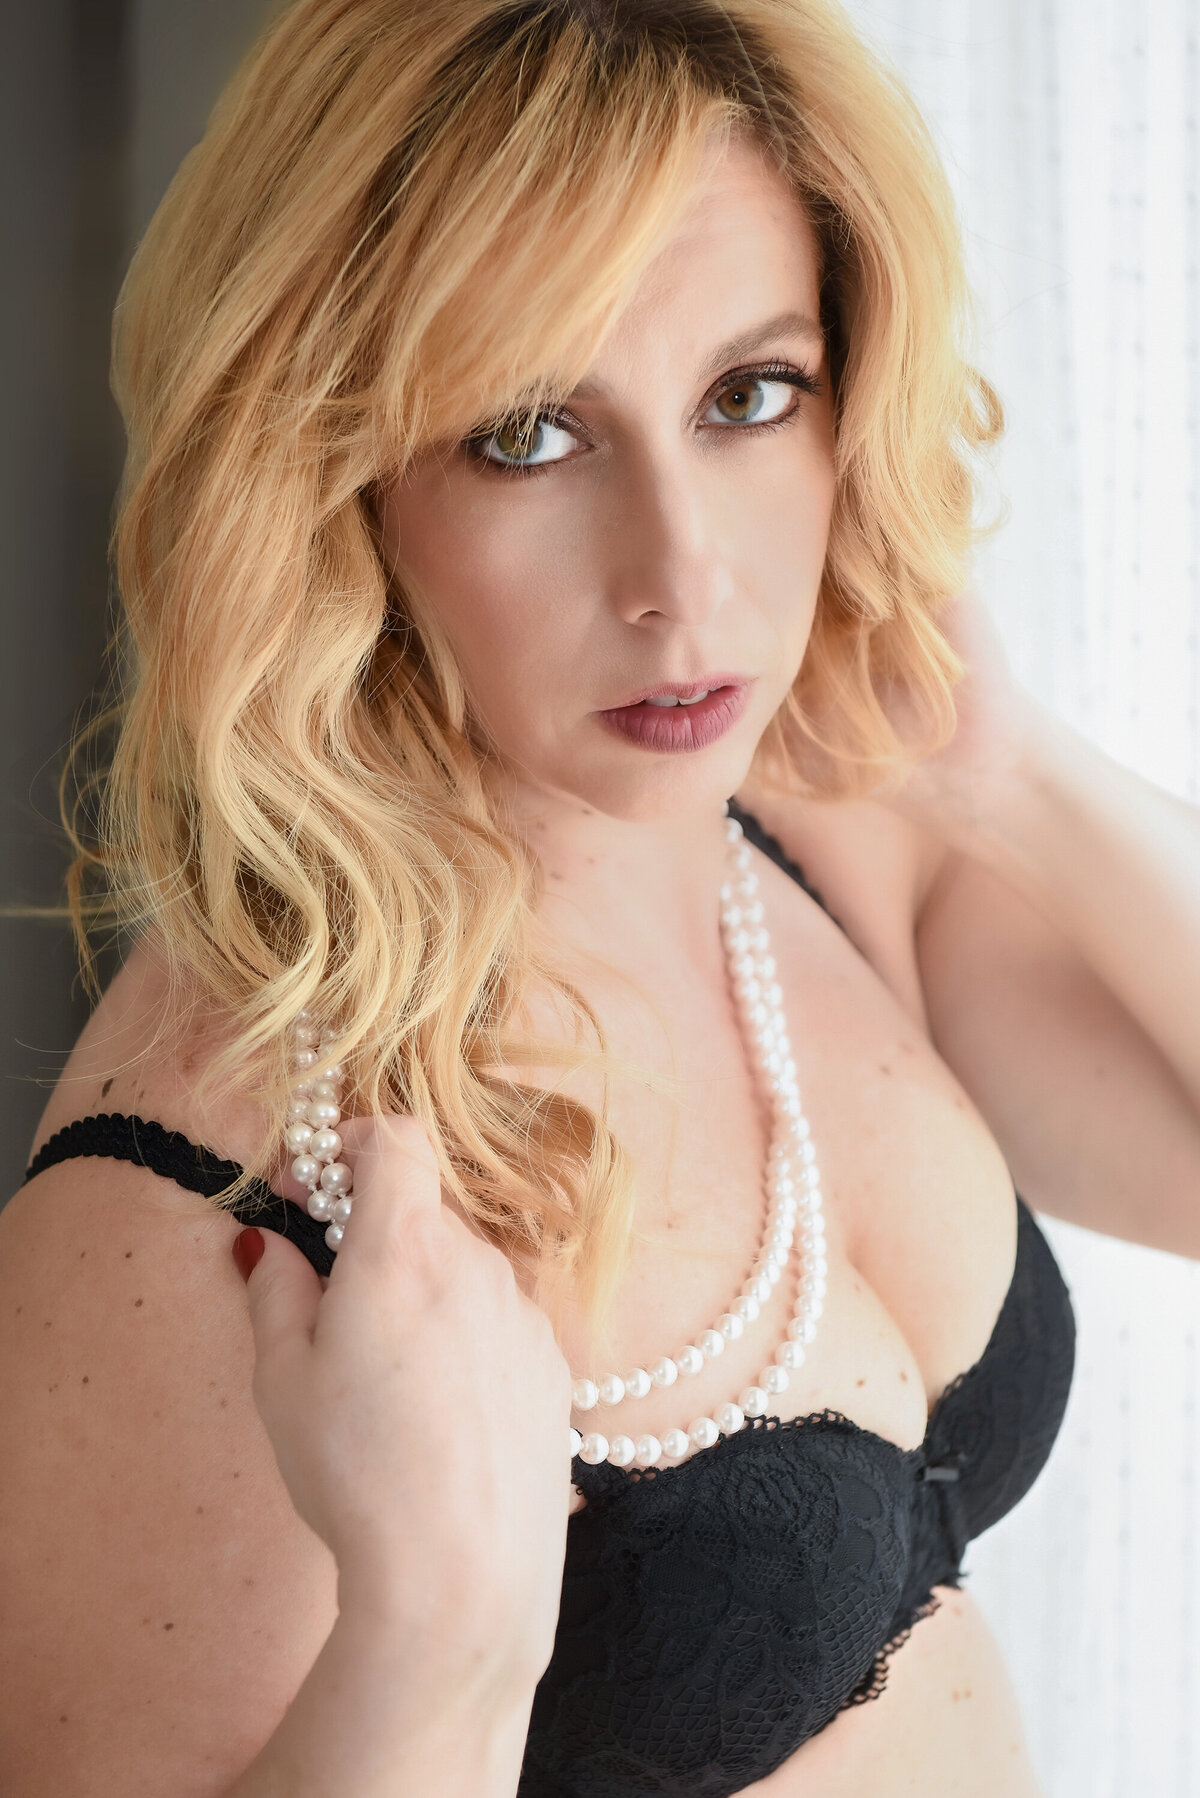 blonde woman with pearl necklace and black bra